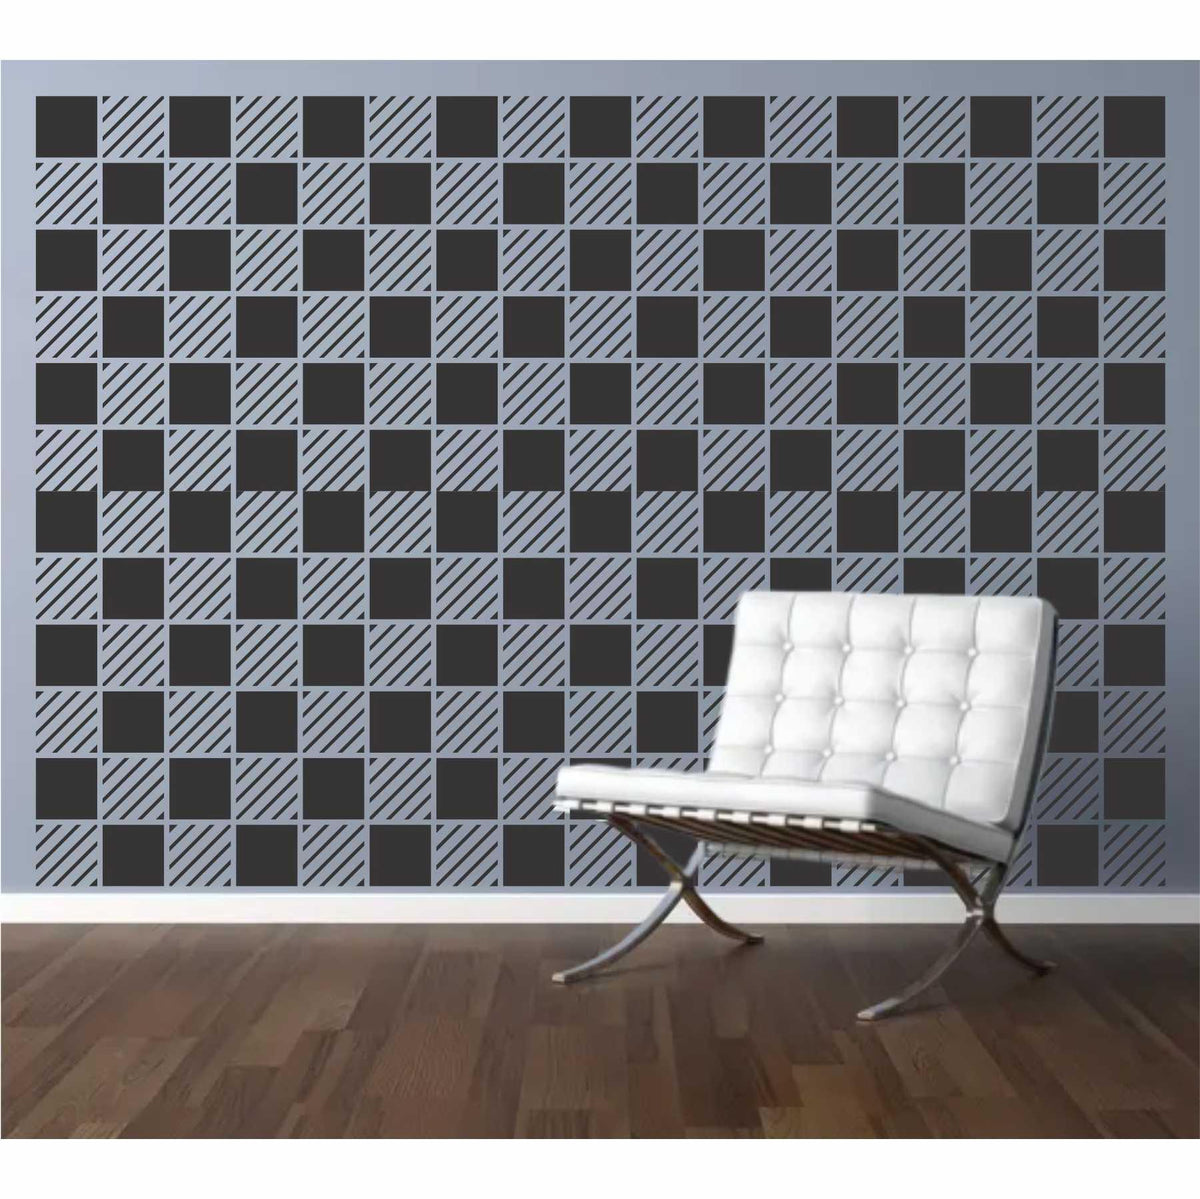 1pc Chess Painting Stencil 11.8x11.8inch Large Chess Pieces Stencil,  Reusable Chess Board Drawing Template, Square Black And White Checkerboard